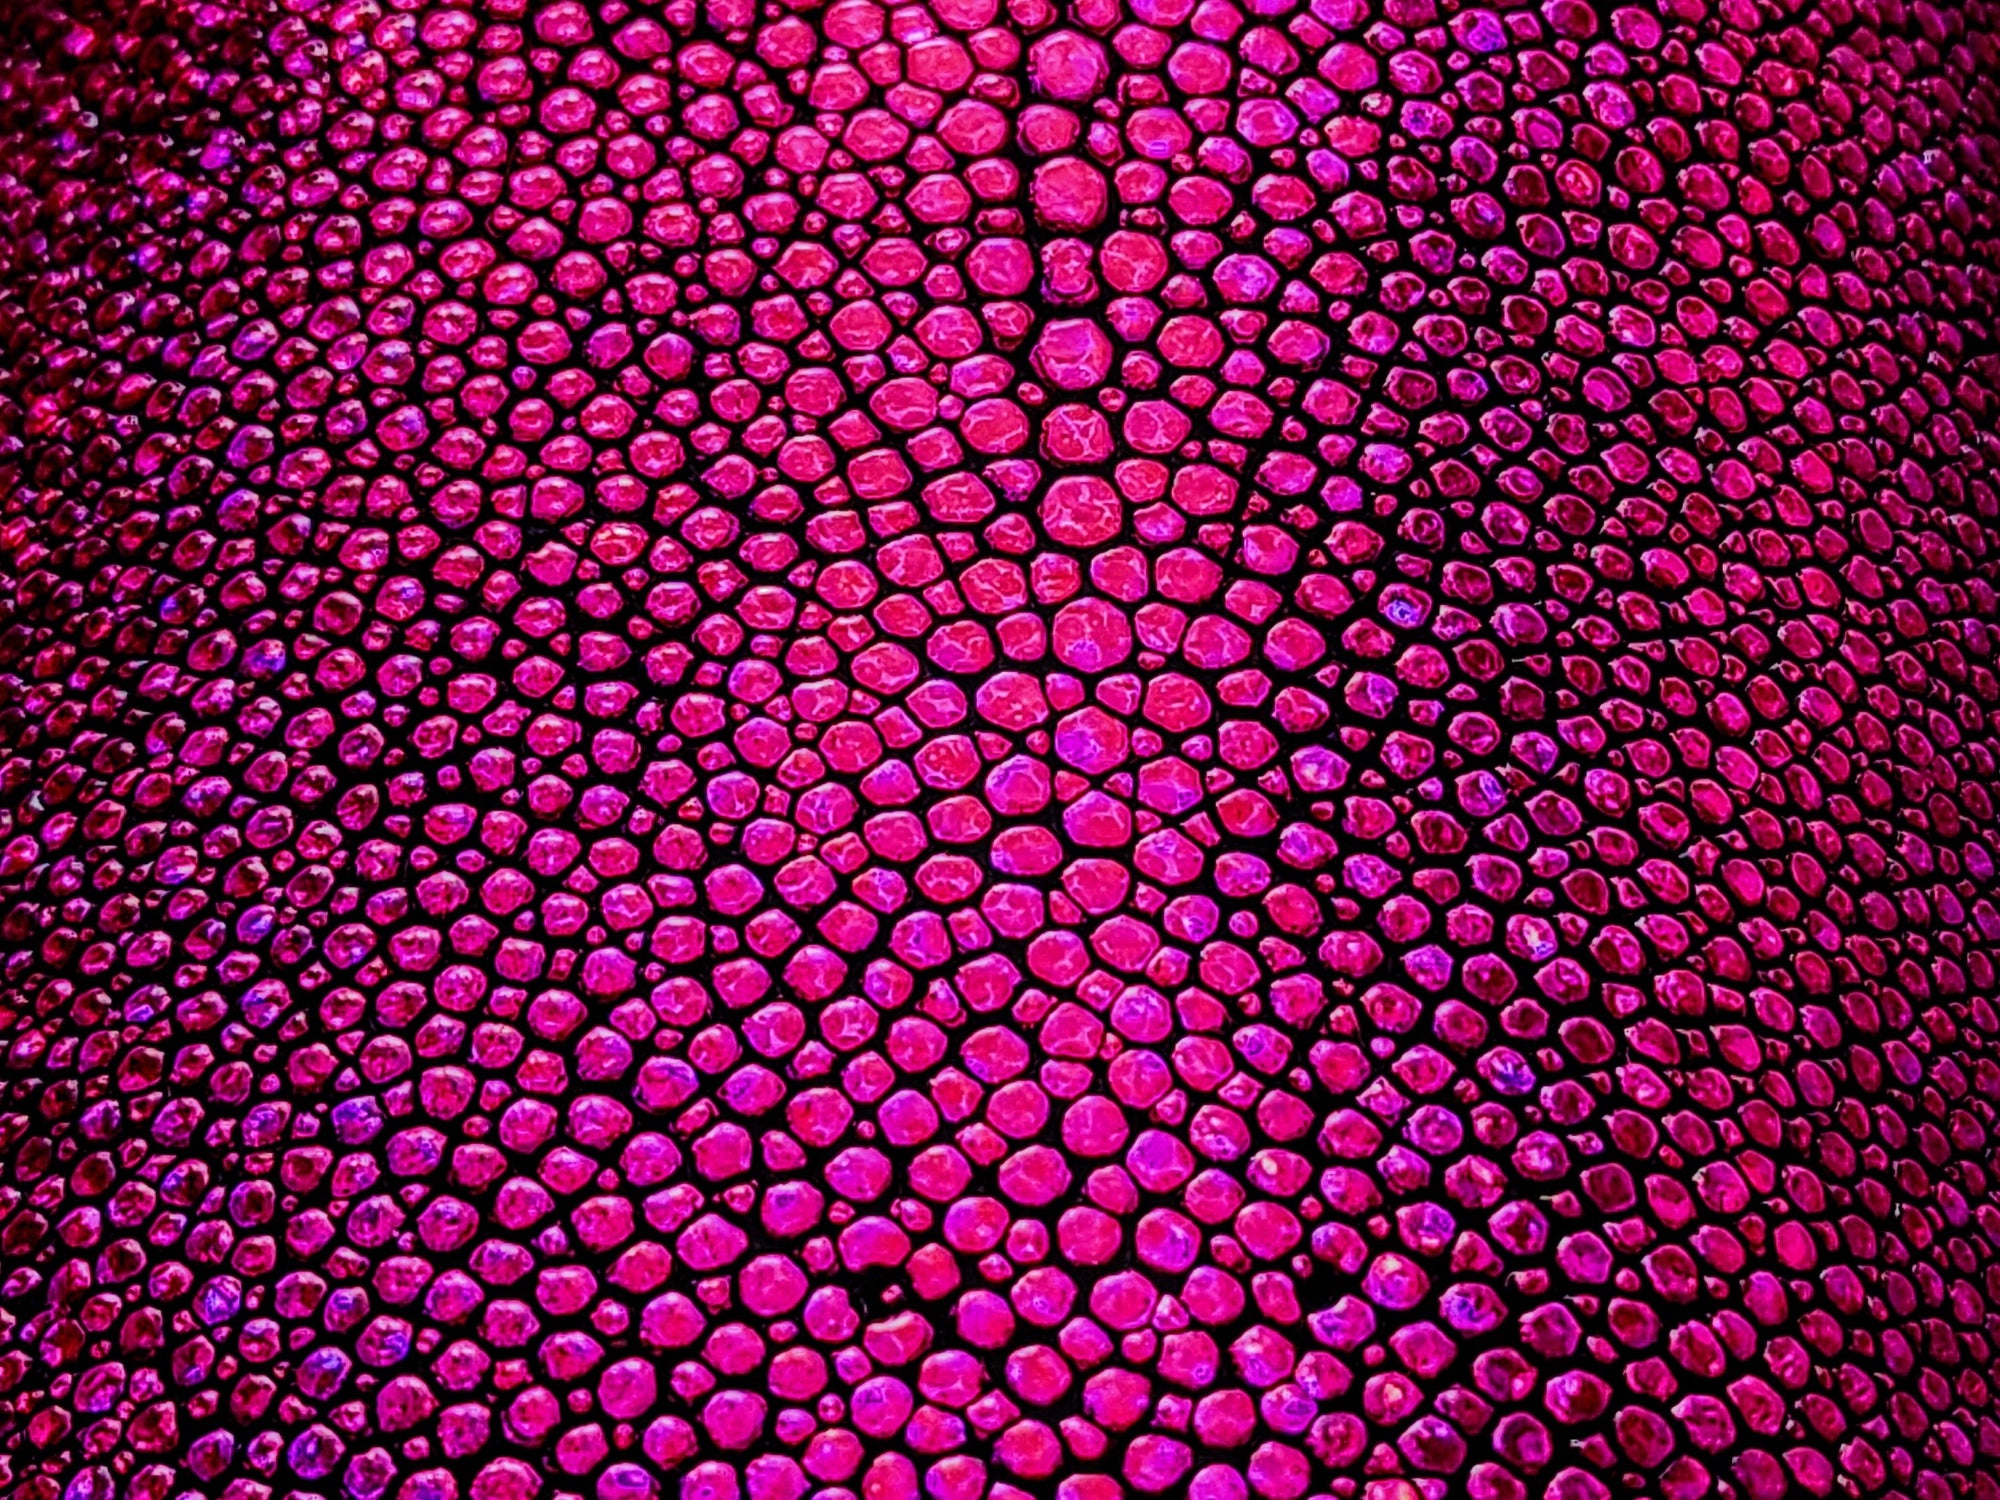  Close-up view of metallic stingray hide in a striking fuchsia hue, capturing the elegance of the leather.